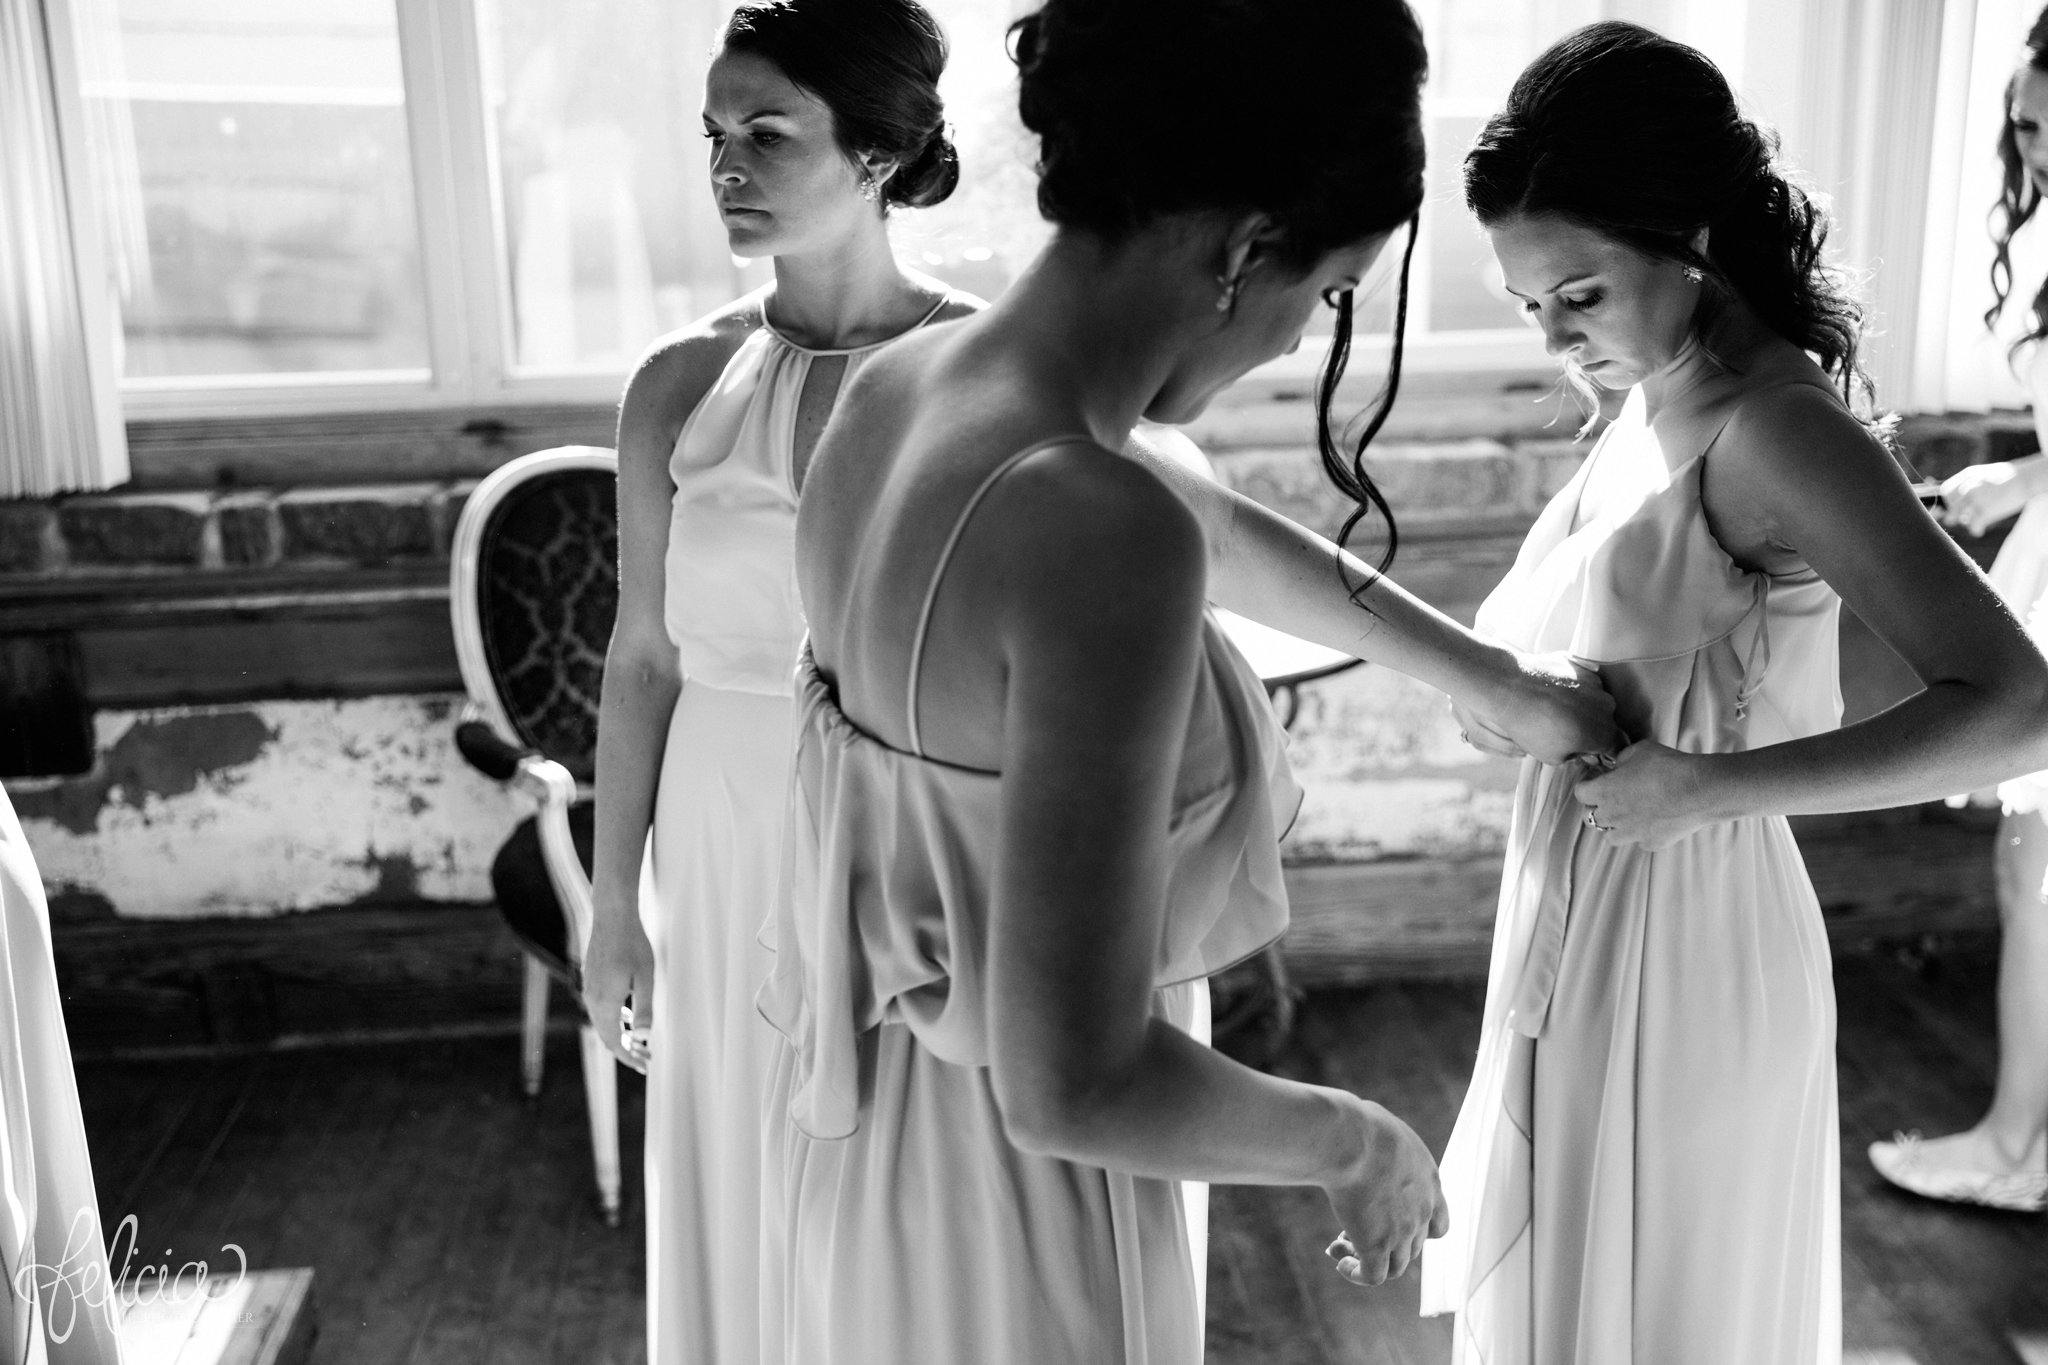 black and white | wedding | wedding photos | industrial | Rumely Event Space | wedding photography | images by feliciathephotographer.com | West Bottoms | getting ready | wedding prep | bridesmaid dresses | Grecian | candid 